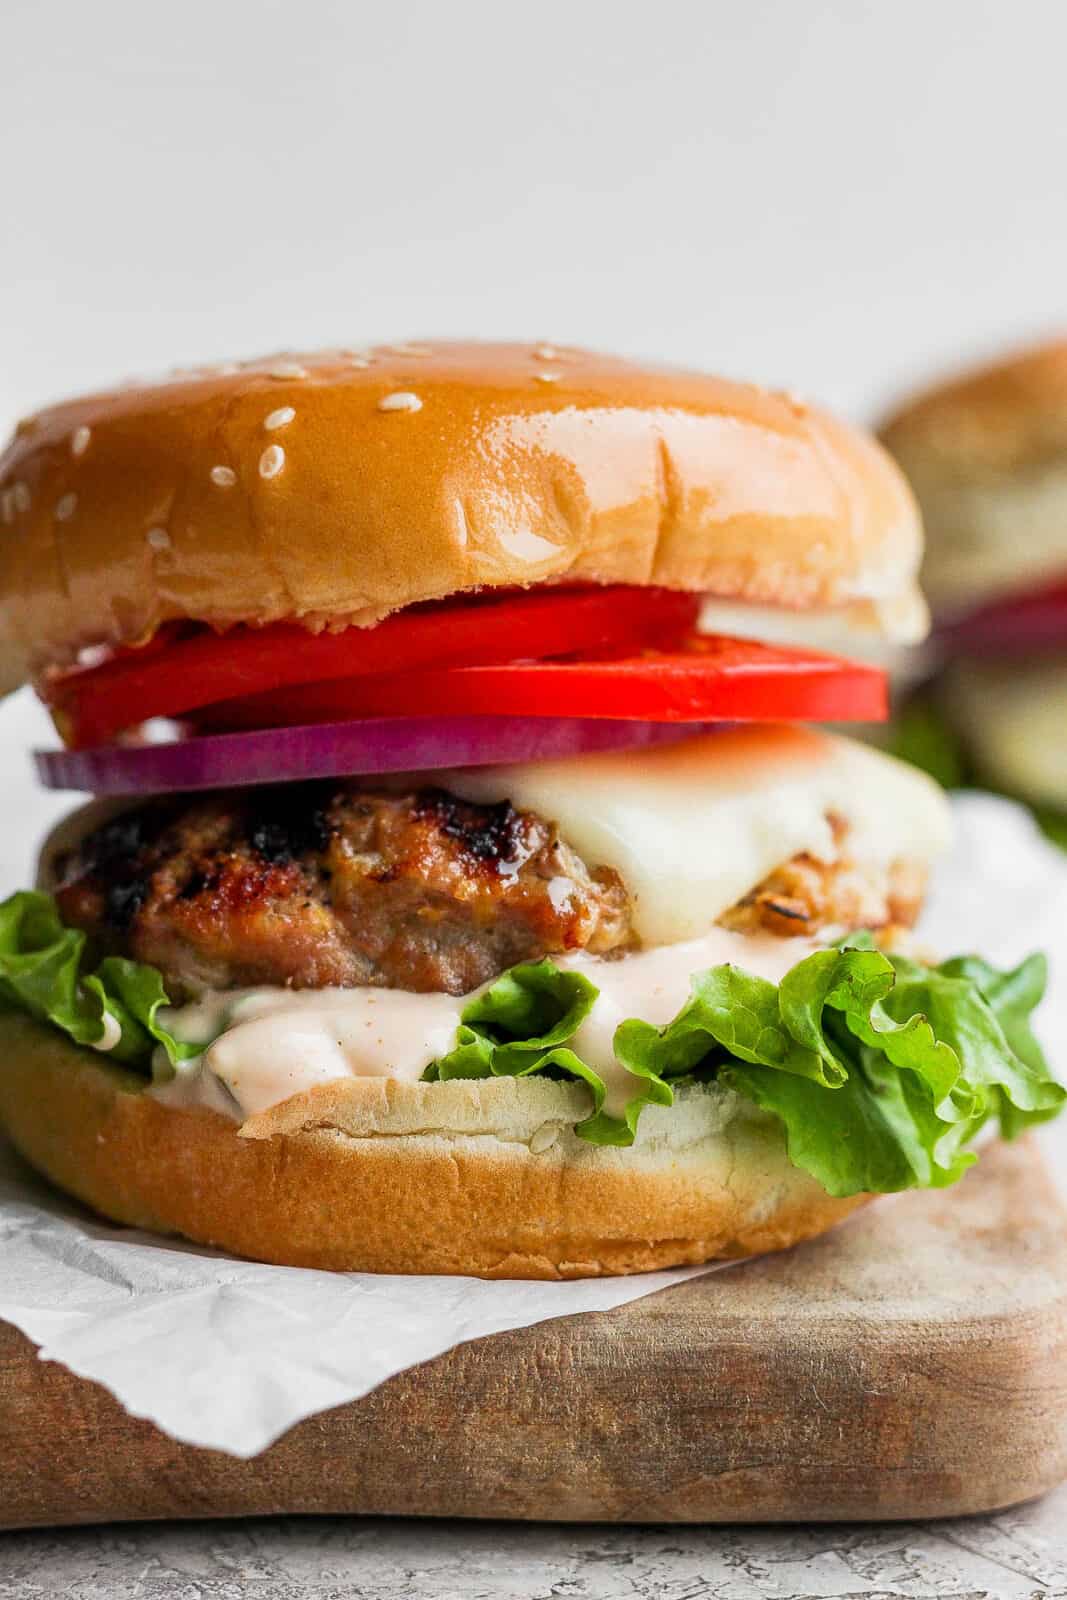 A juicy grilled turkey burger on a bun with toppings.